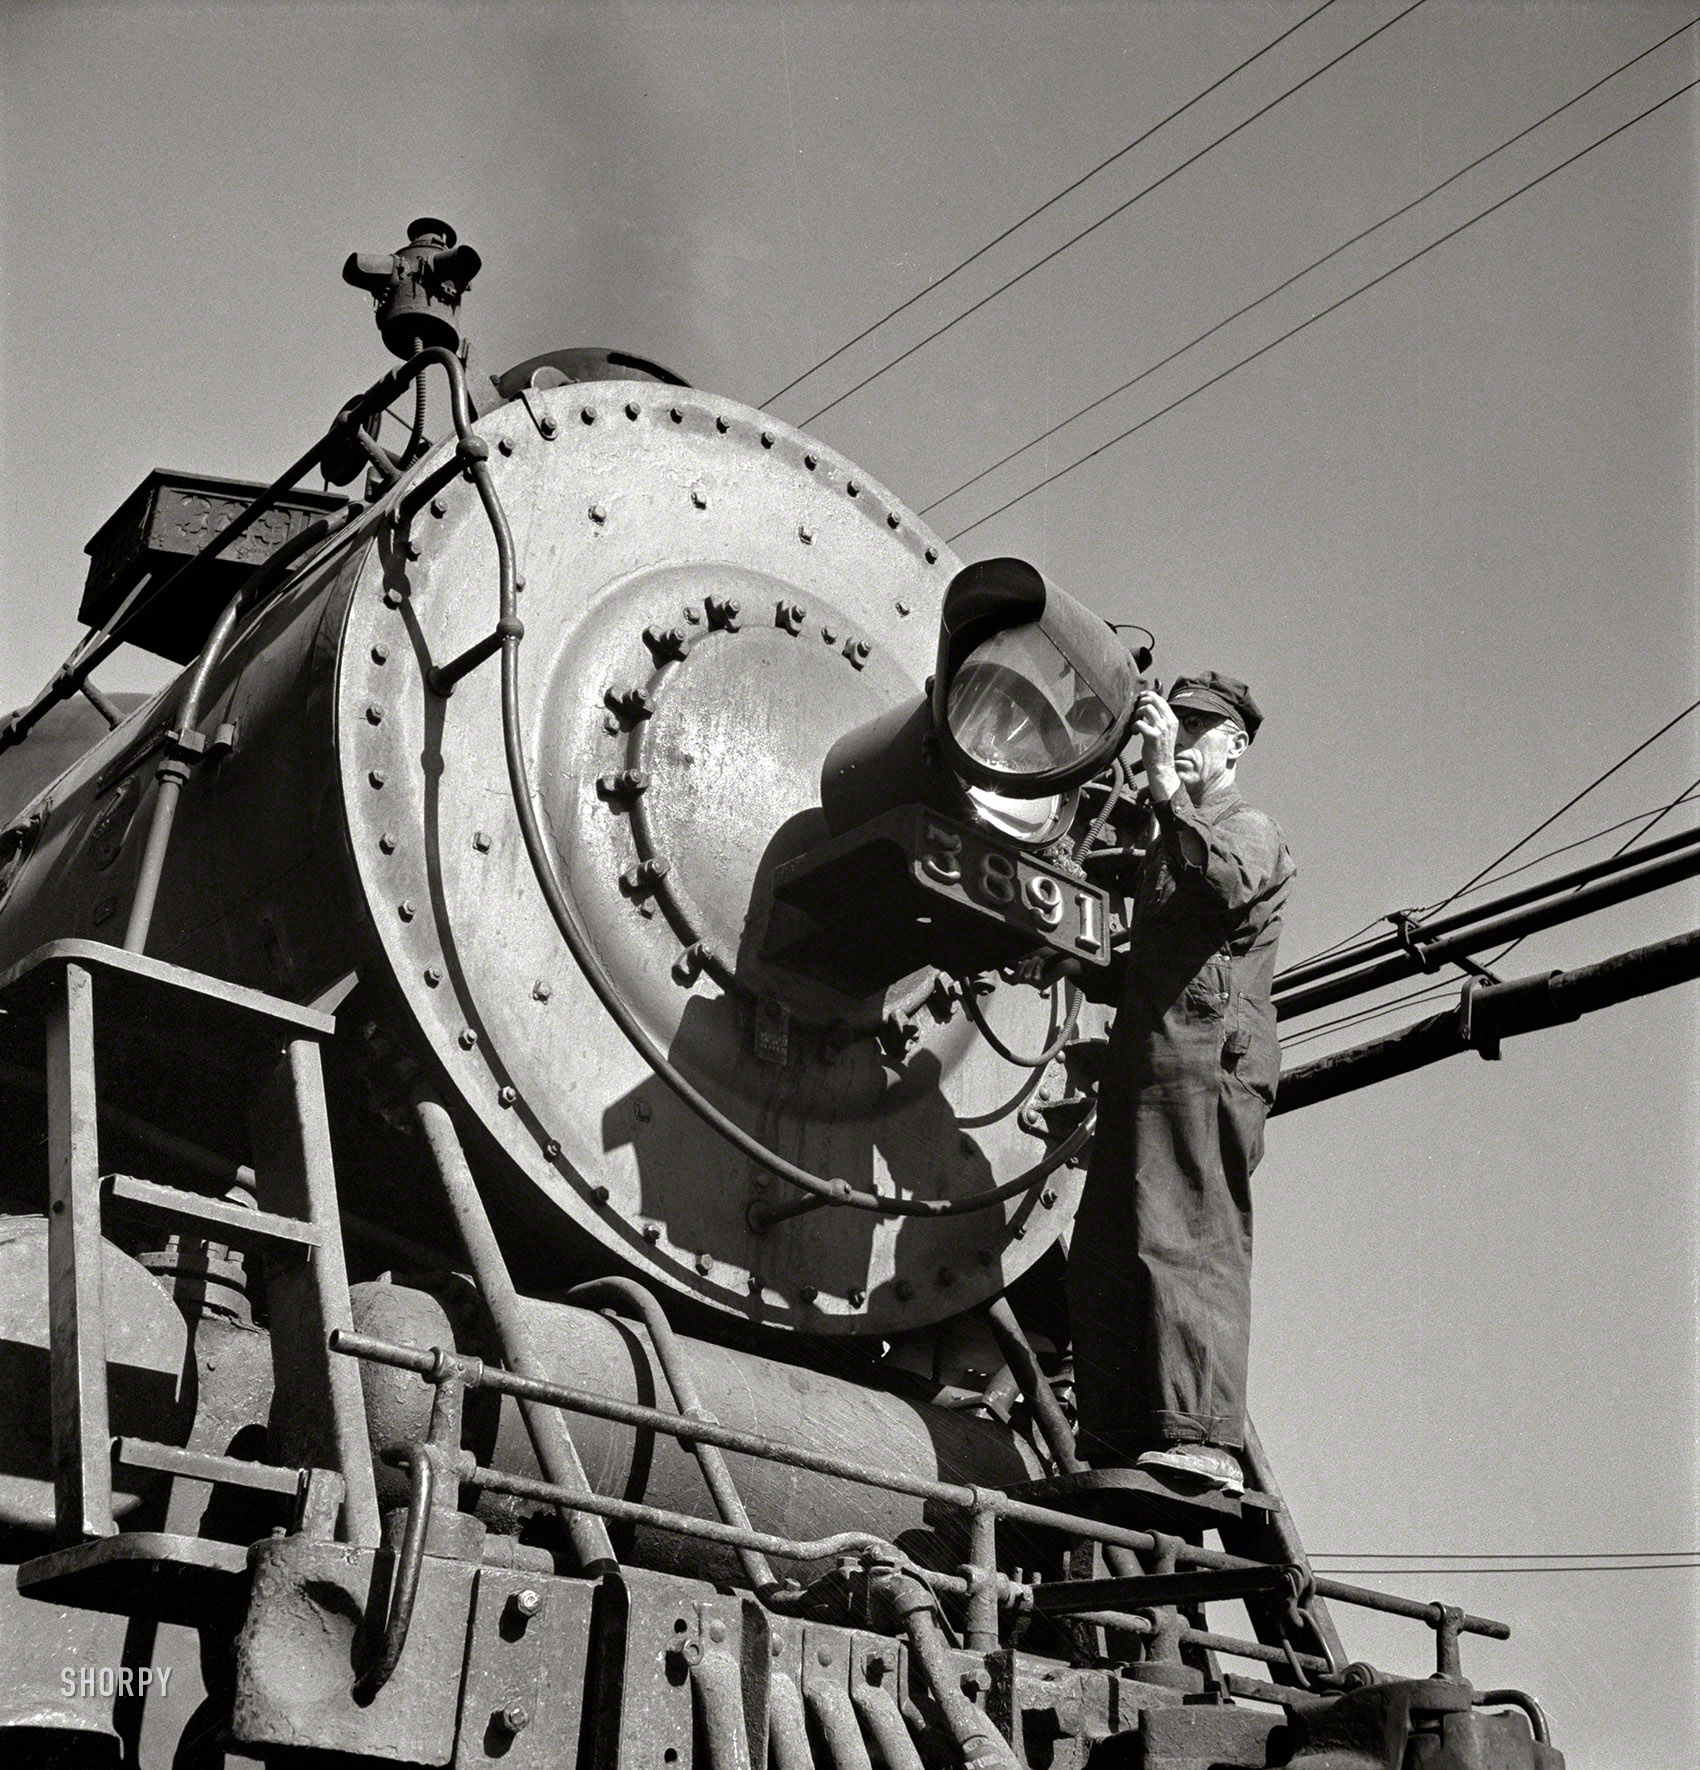 March 1943. "Needles, Calif. Electrician B. Fitzgerald cleaning the headlight of a locomotive at the Atchison, Topeka & Santa Fe yard. All engines operating west of Needles are equipped with hooded headlights in accordance with the blackout regulations." Photo by Jack Delano, Office of War Information. View full size.